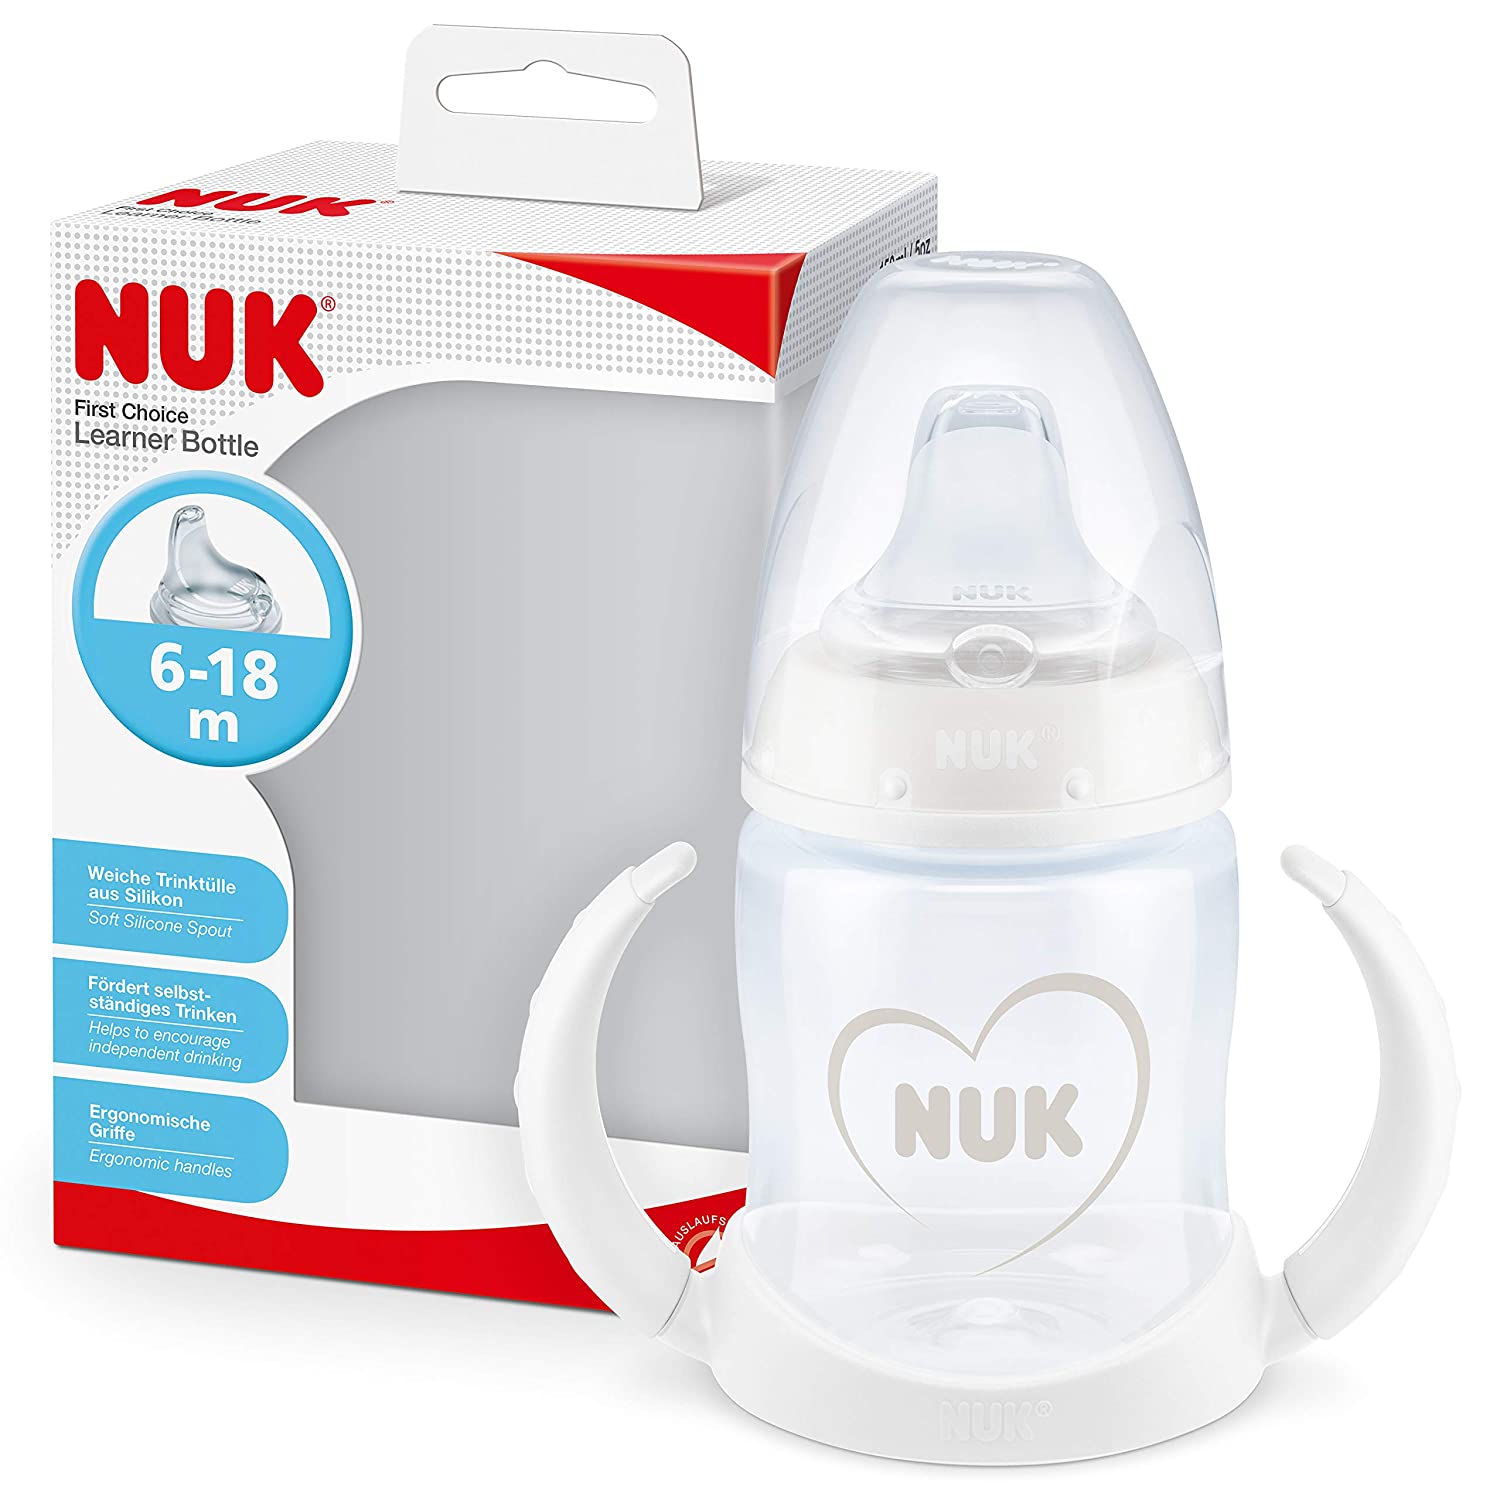 The NUK First Choice Training Bottle